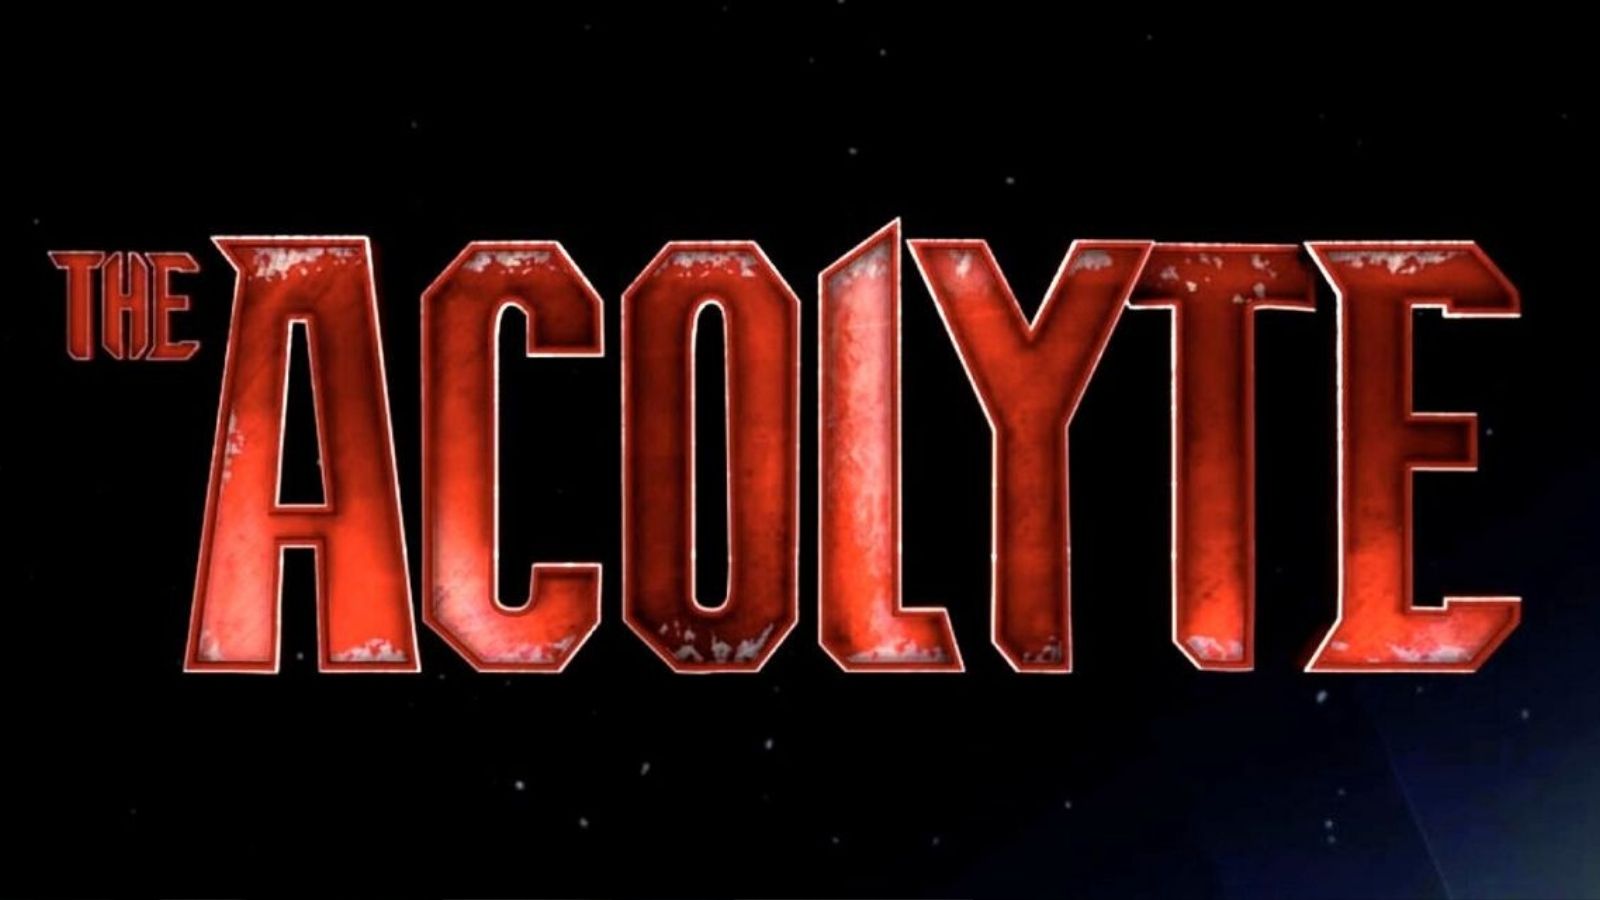 The Acolyte’ is rumored to have its release date moved